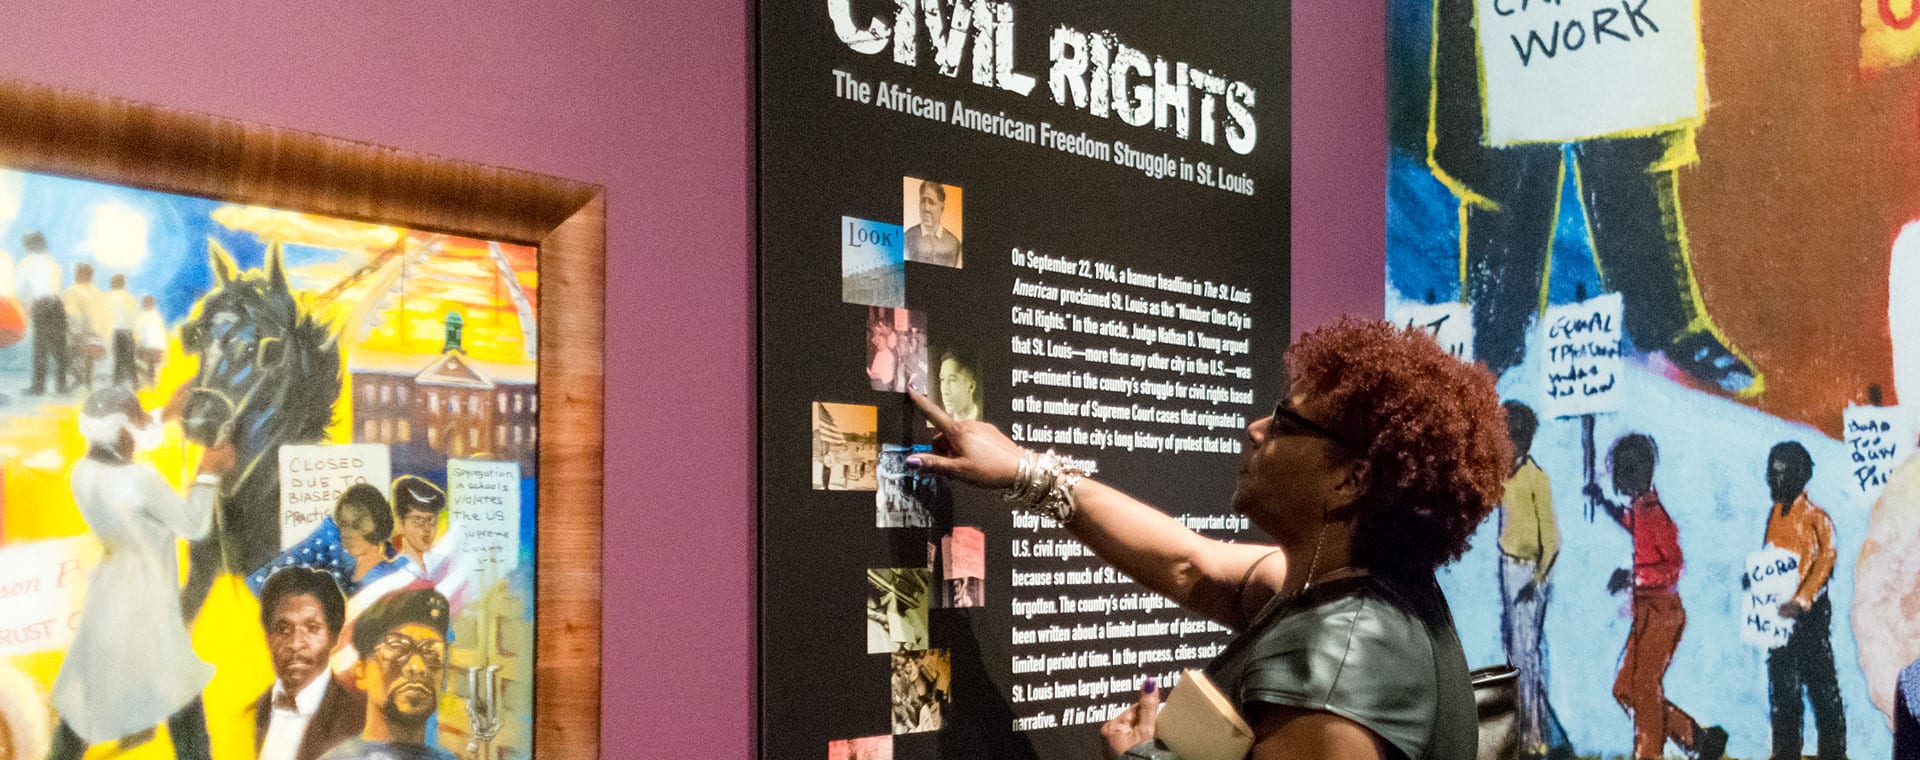 Maryville sponsors Civil Rights exhibit at Missouri History Museum